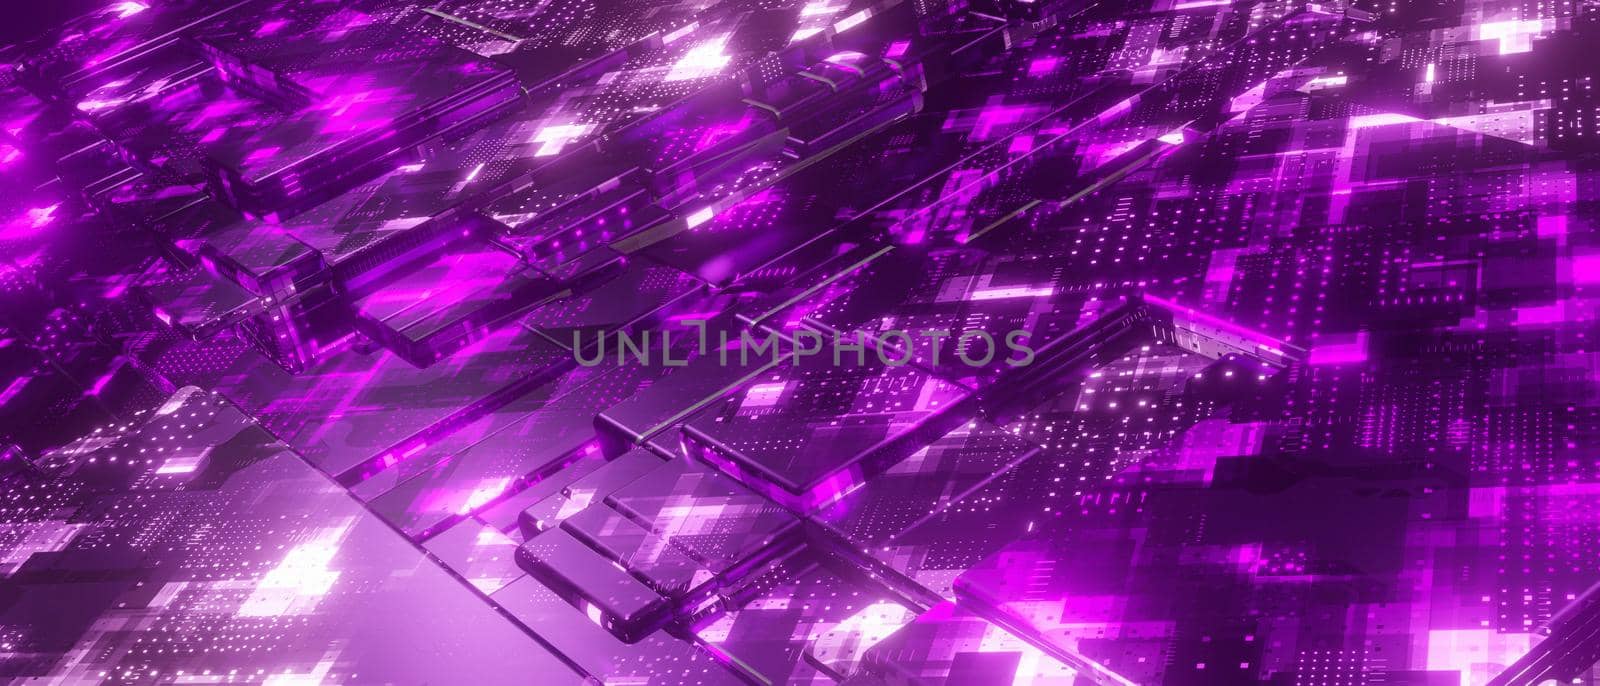 Abstract Amazing Sci-fi Hi-tech Equipment Or Facility Different Moods Digital Deep Violet Illustrative Banner Background Wallpaper Different Concepts 3D Render